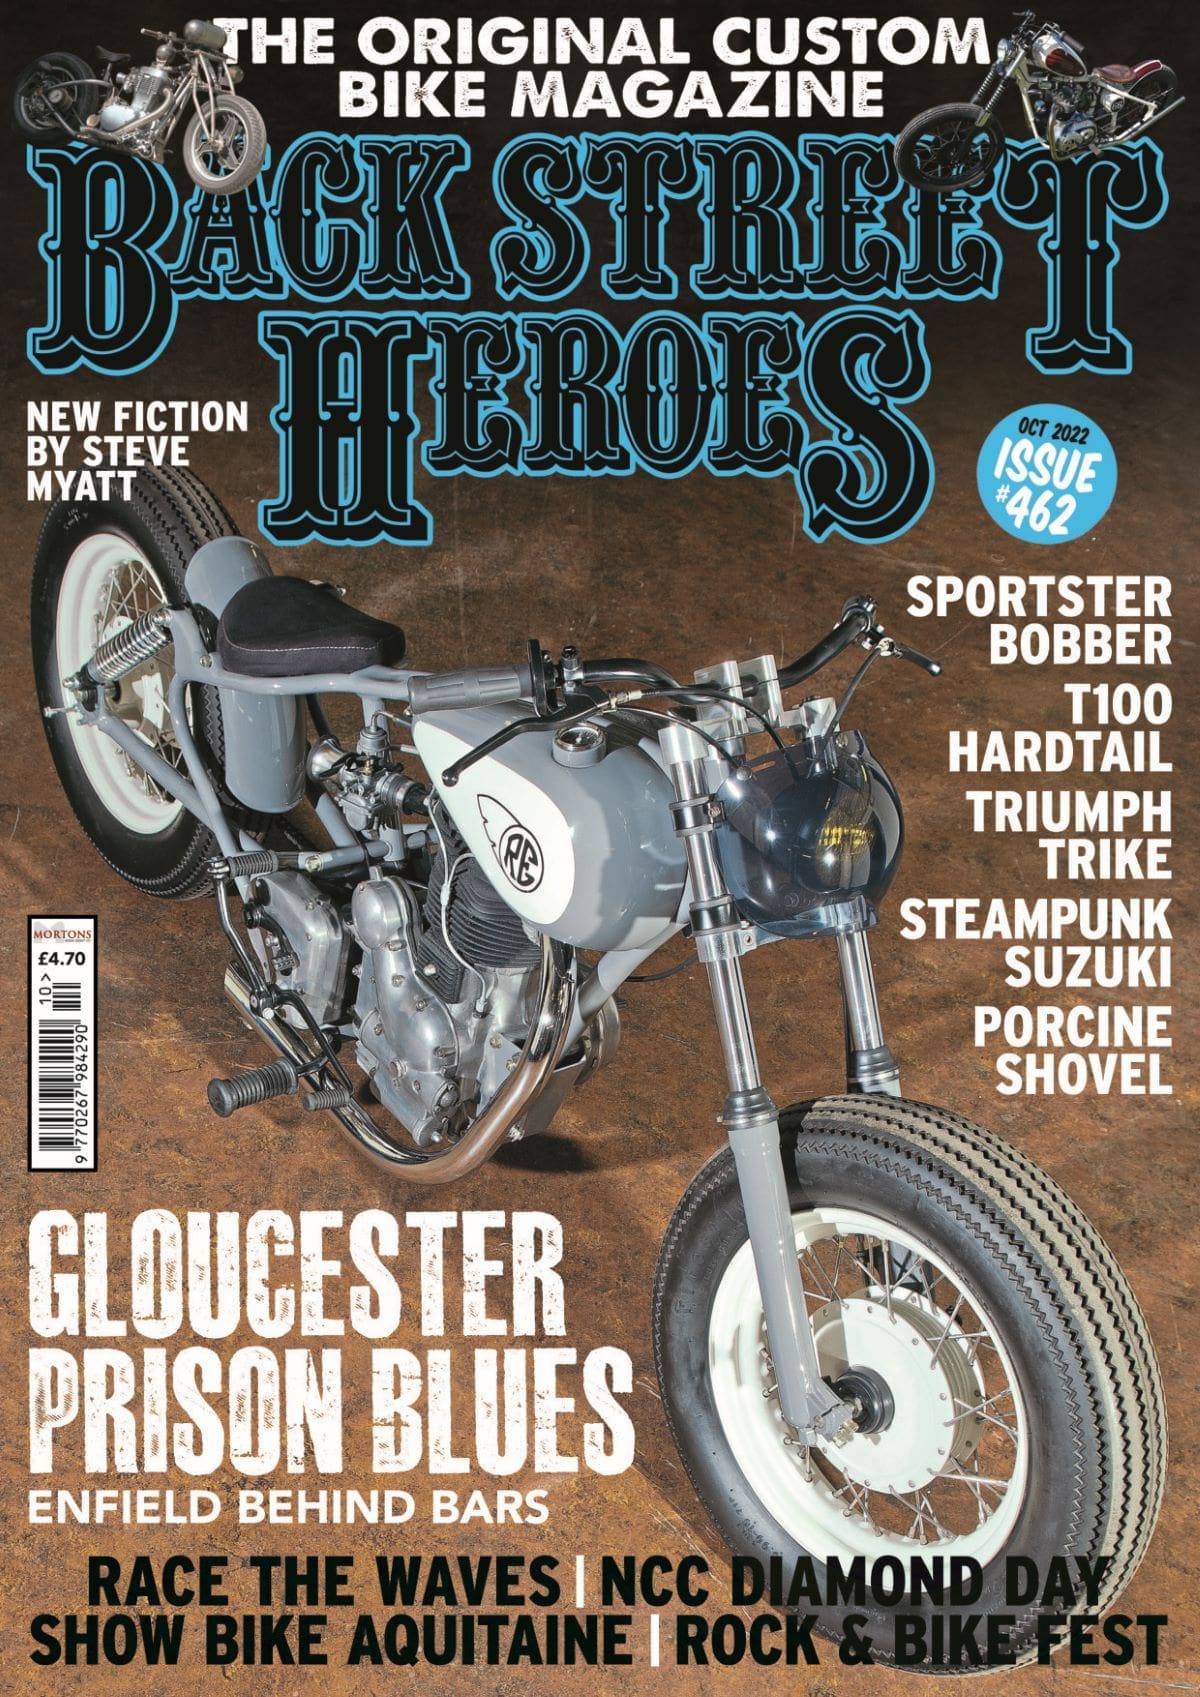 Preview: October issue of Back Street Heroes Magazine